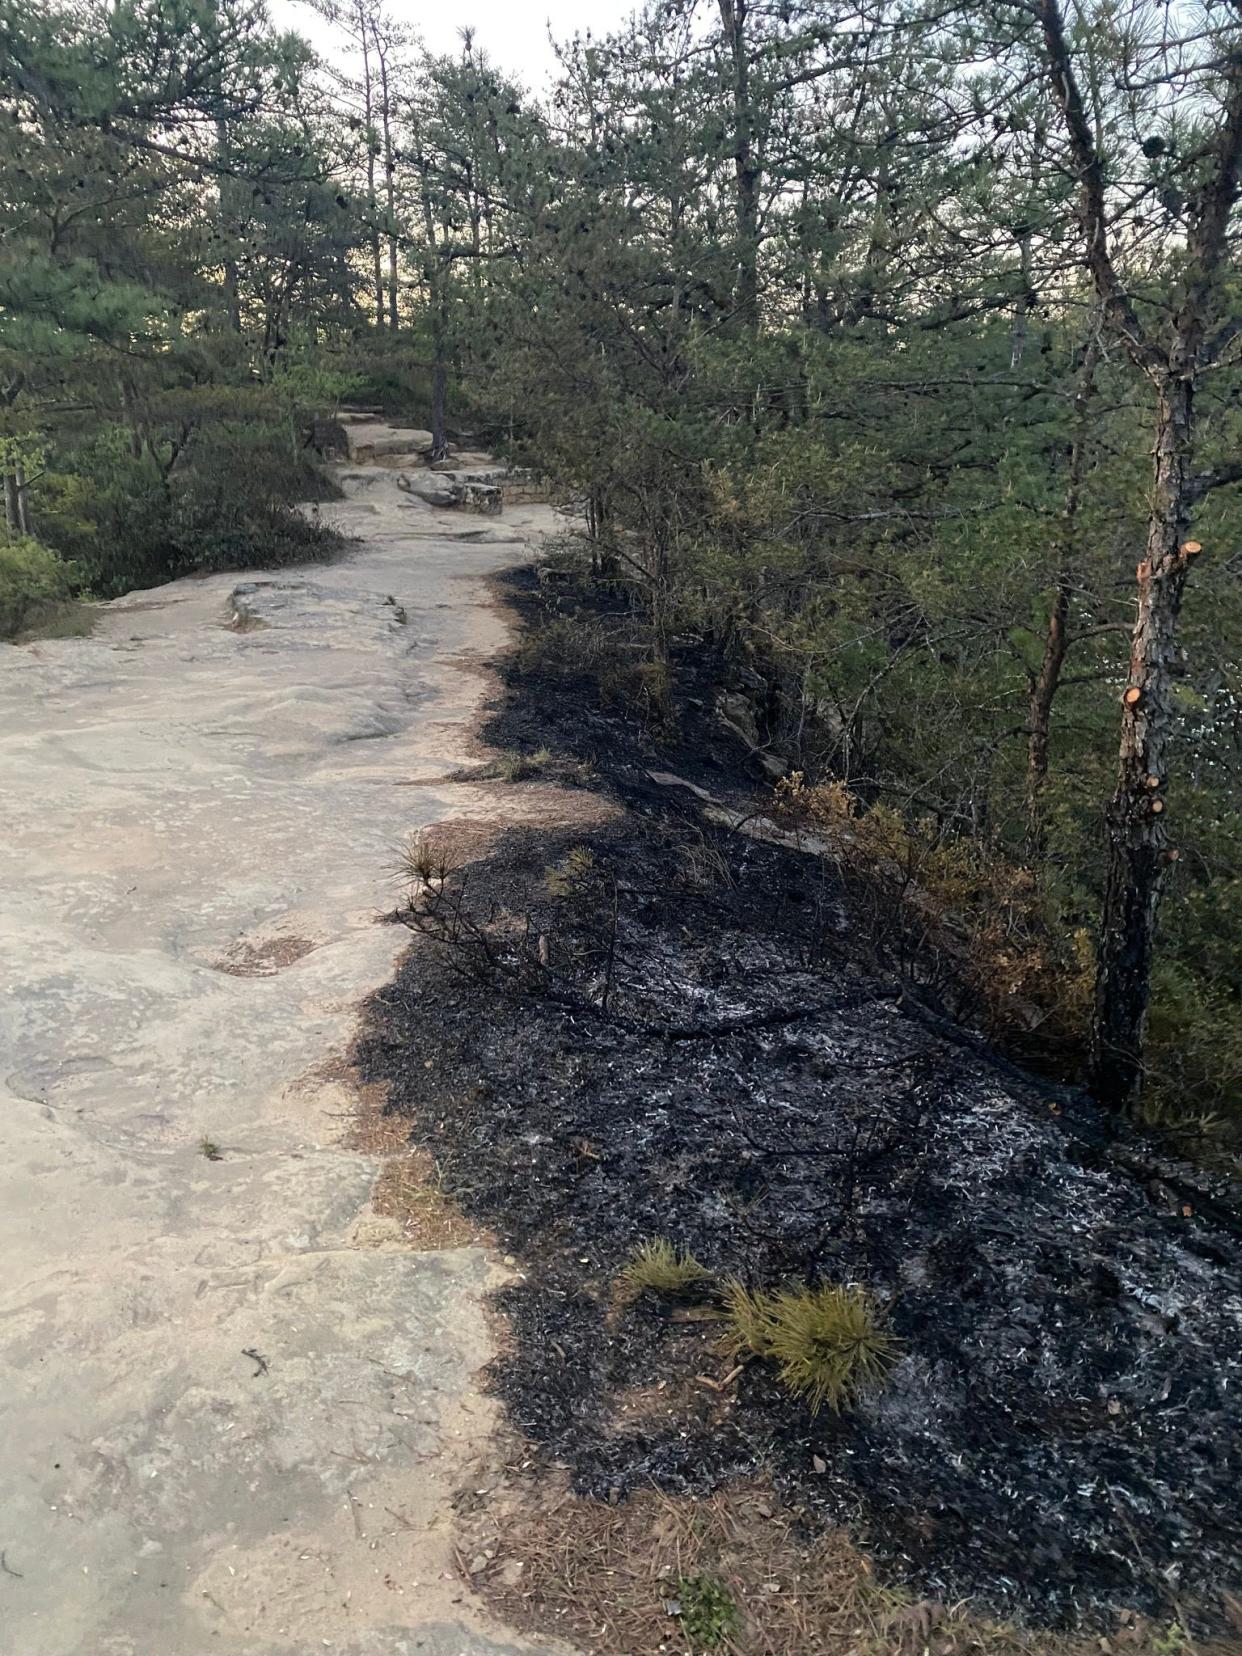 The wildfire at Natural Bridge State Resort Park in Slade, Kentucky, was caused by "probable arson," a state official said.